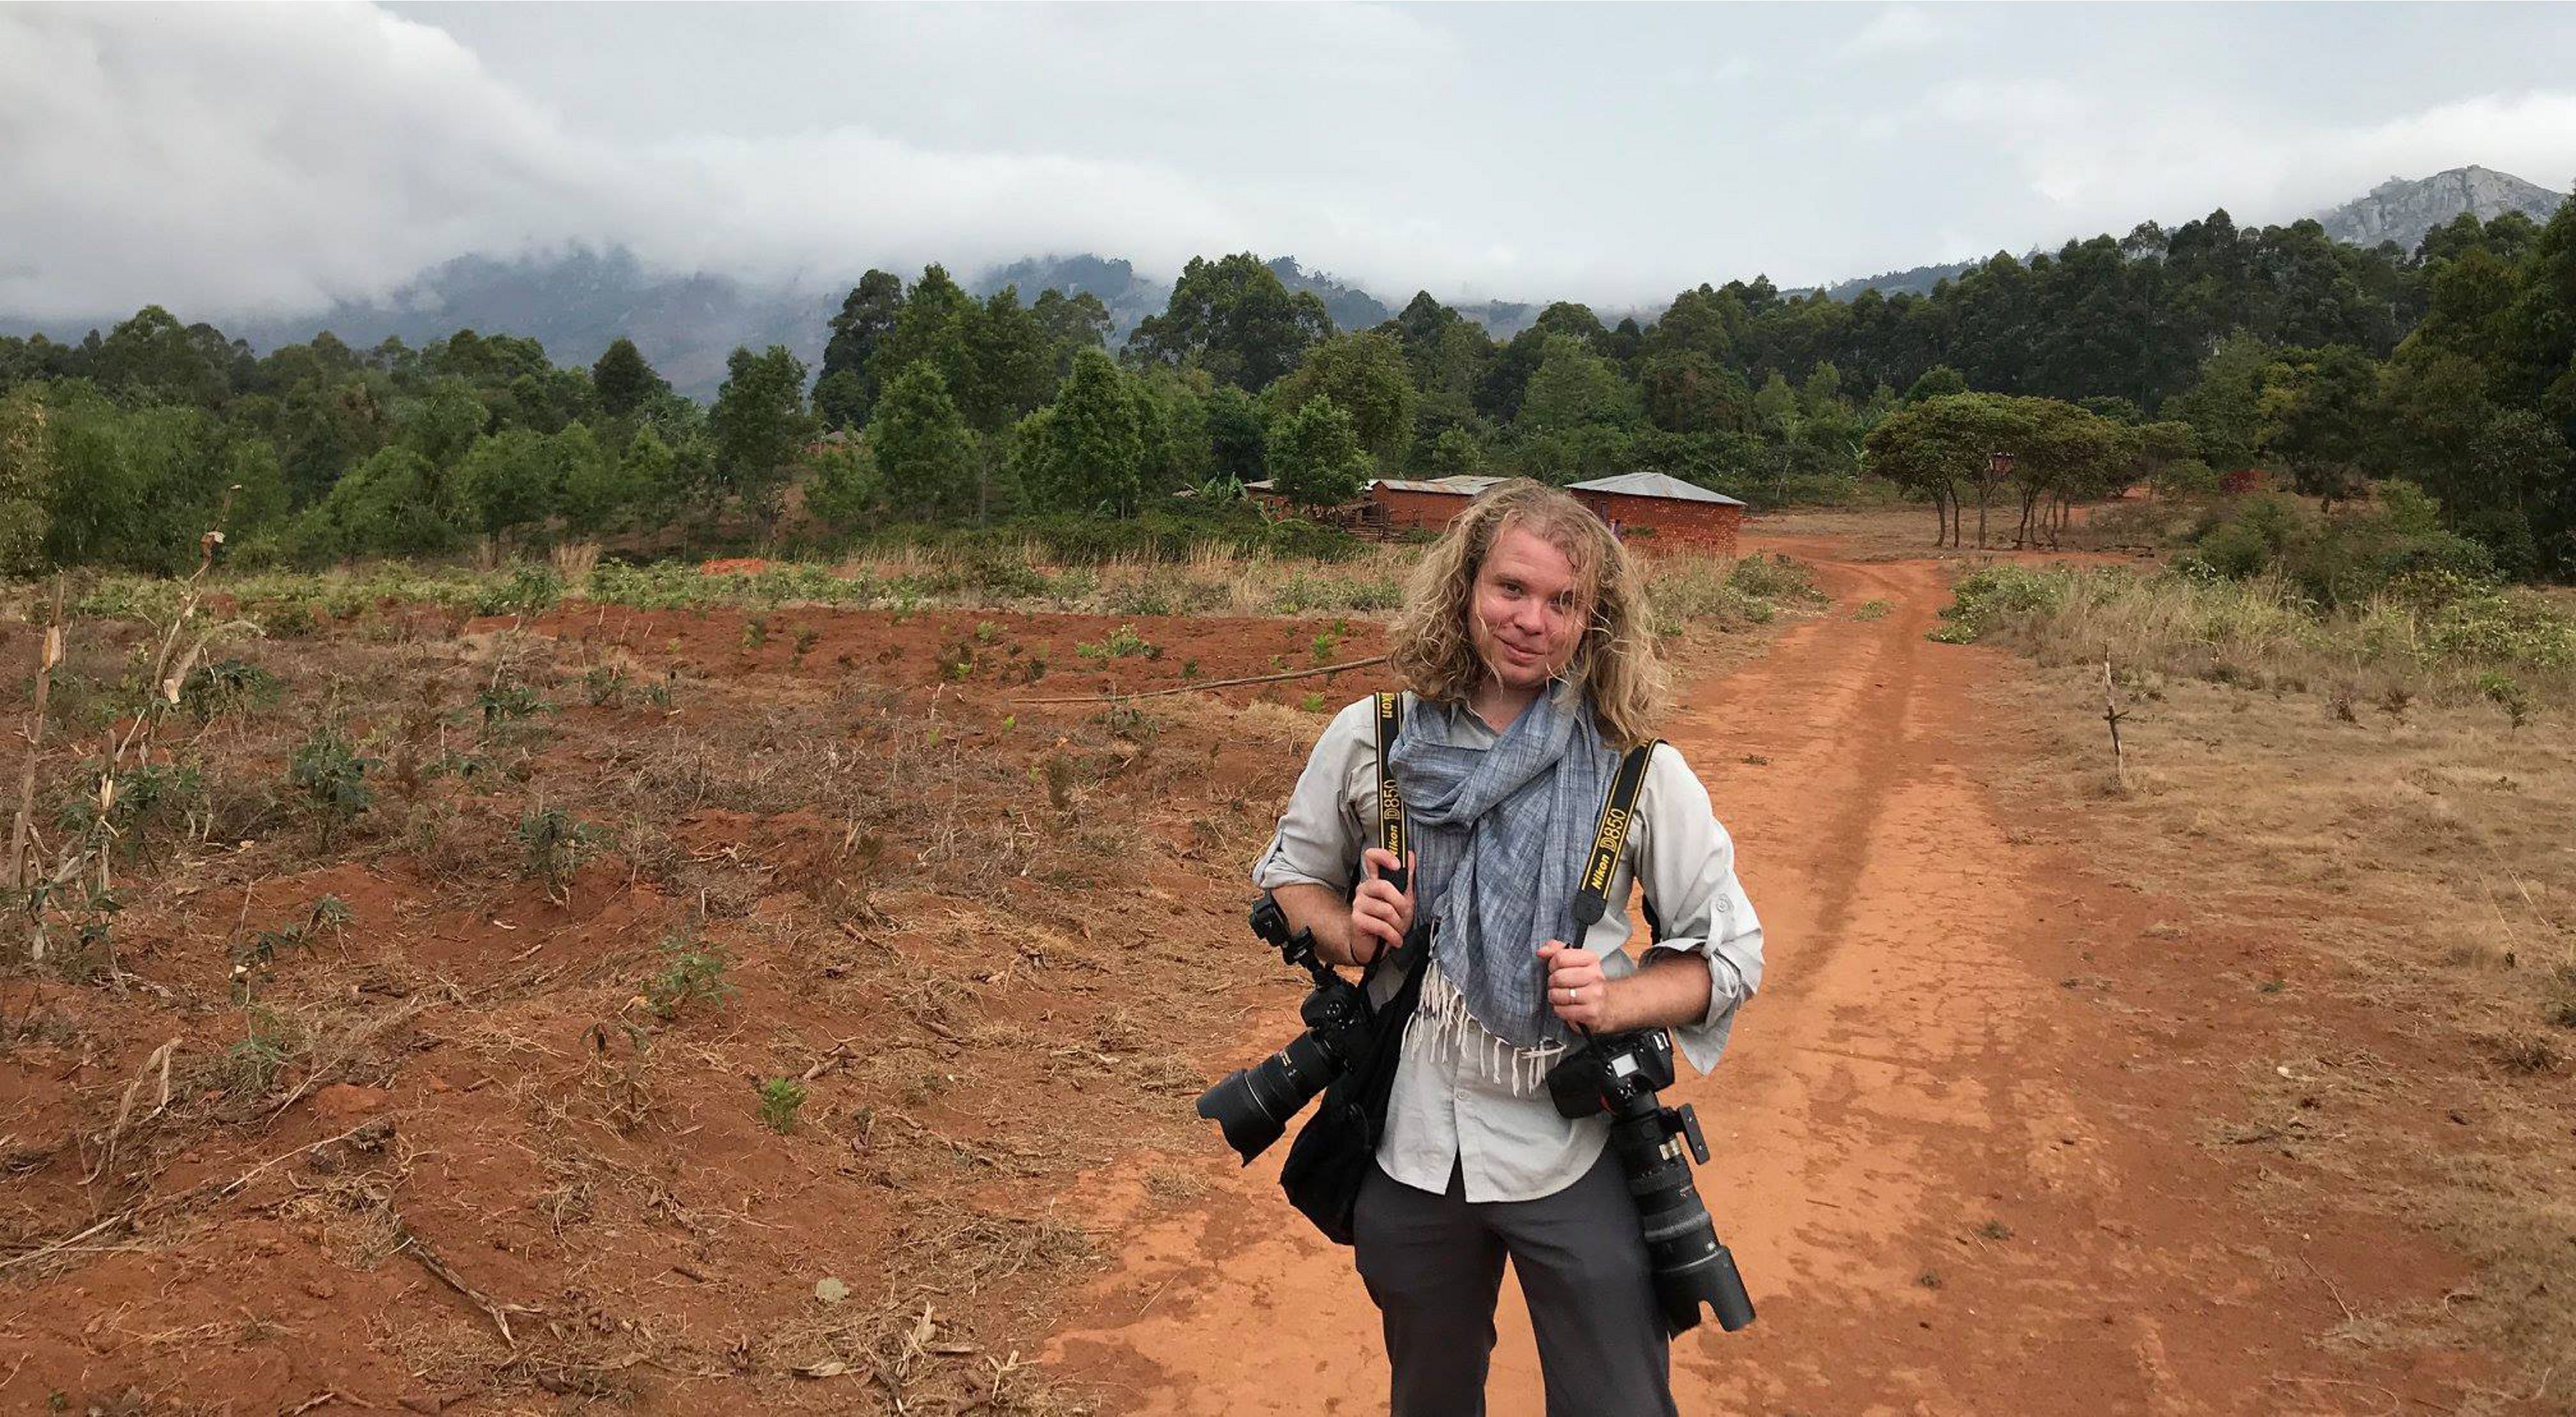 Alex Snyder with his photography gear in Tanzania.